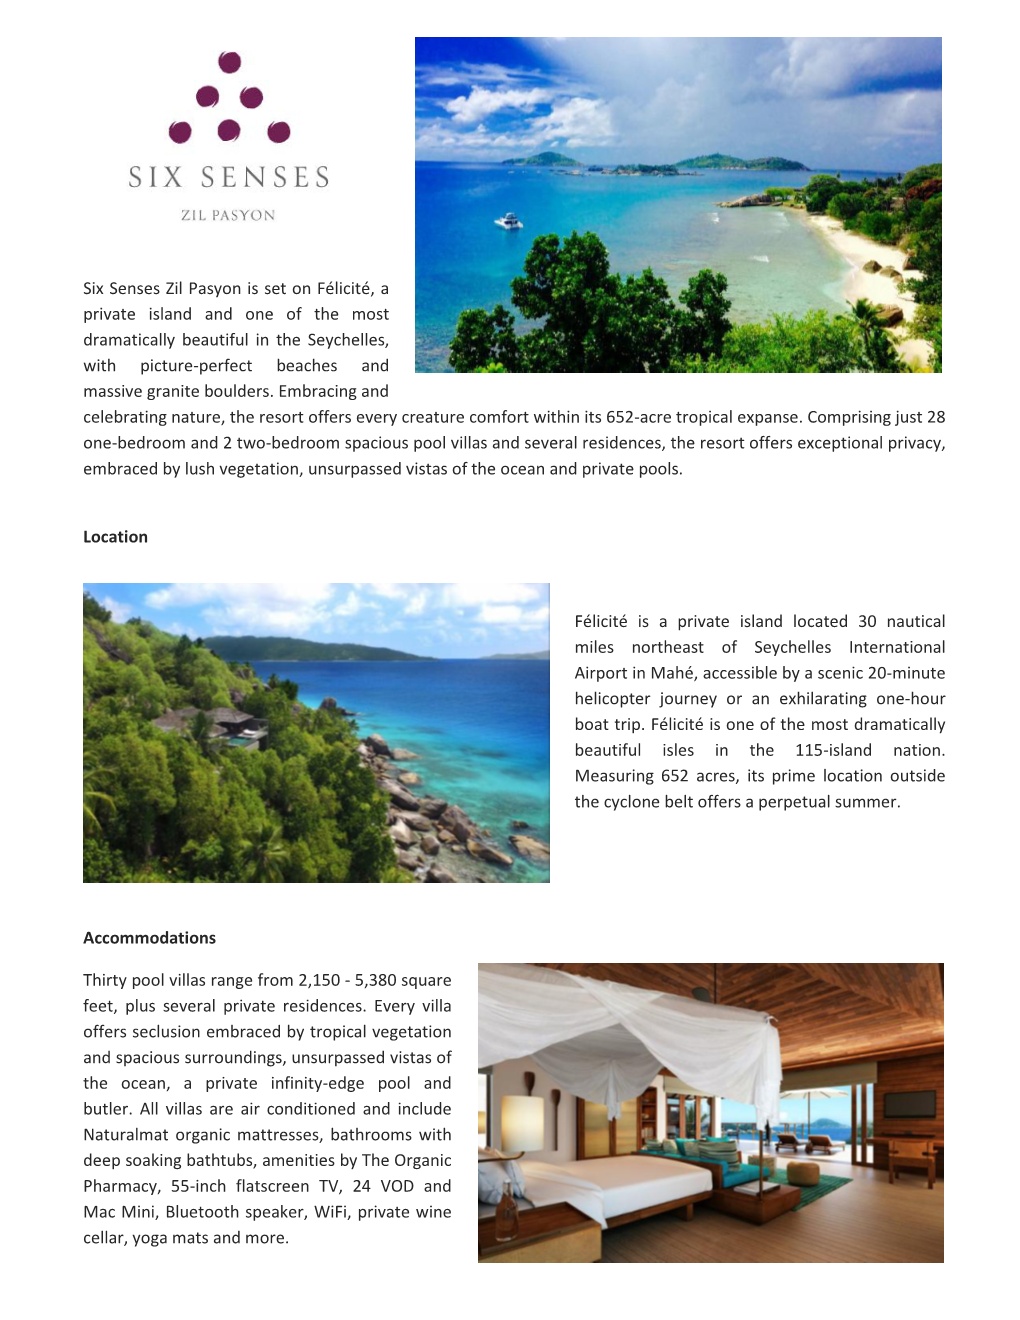 Six Senses Zil Pasyon Is Set on Félicité, a Private Island and One Of